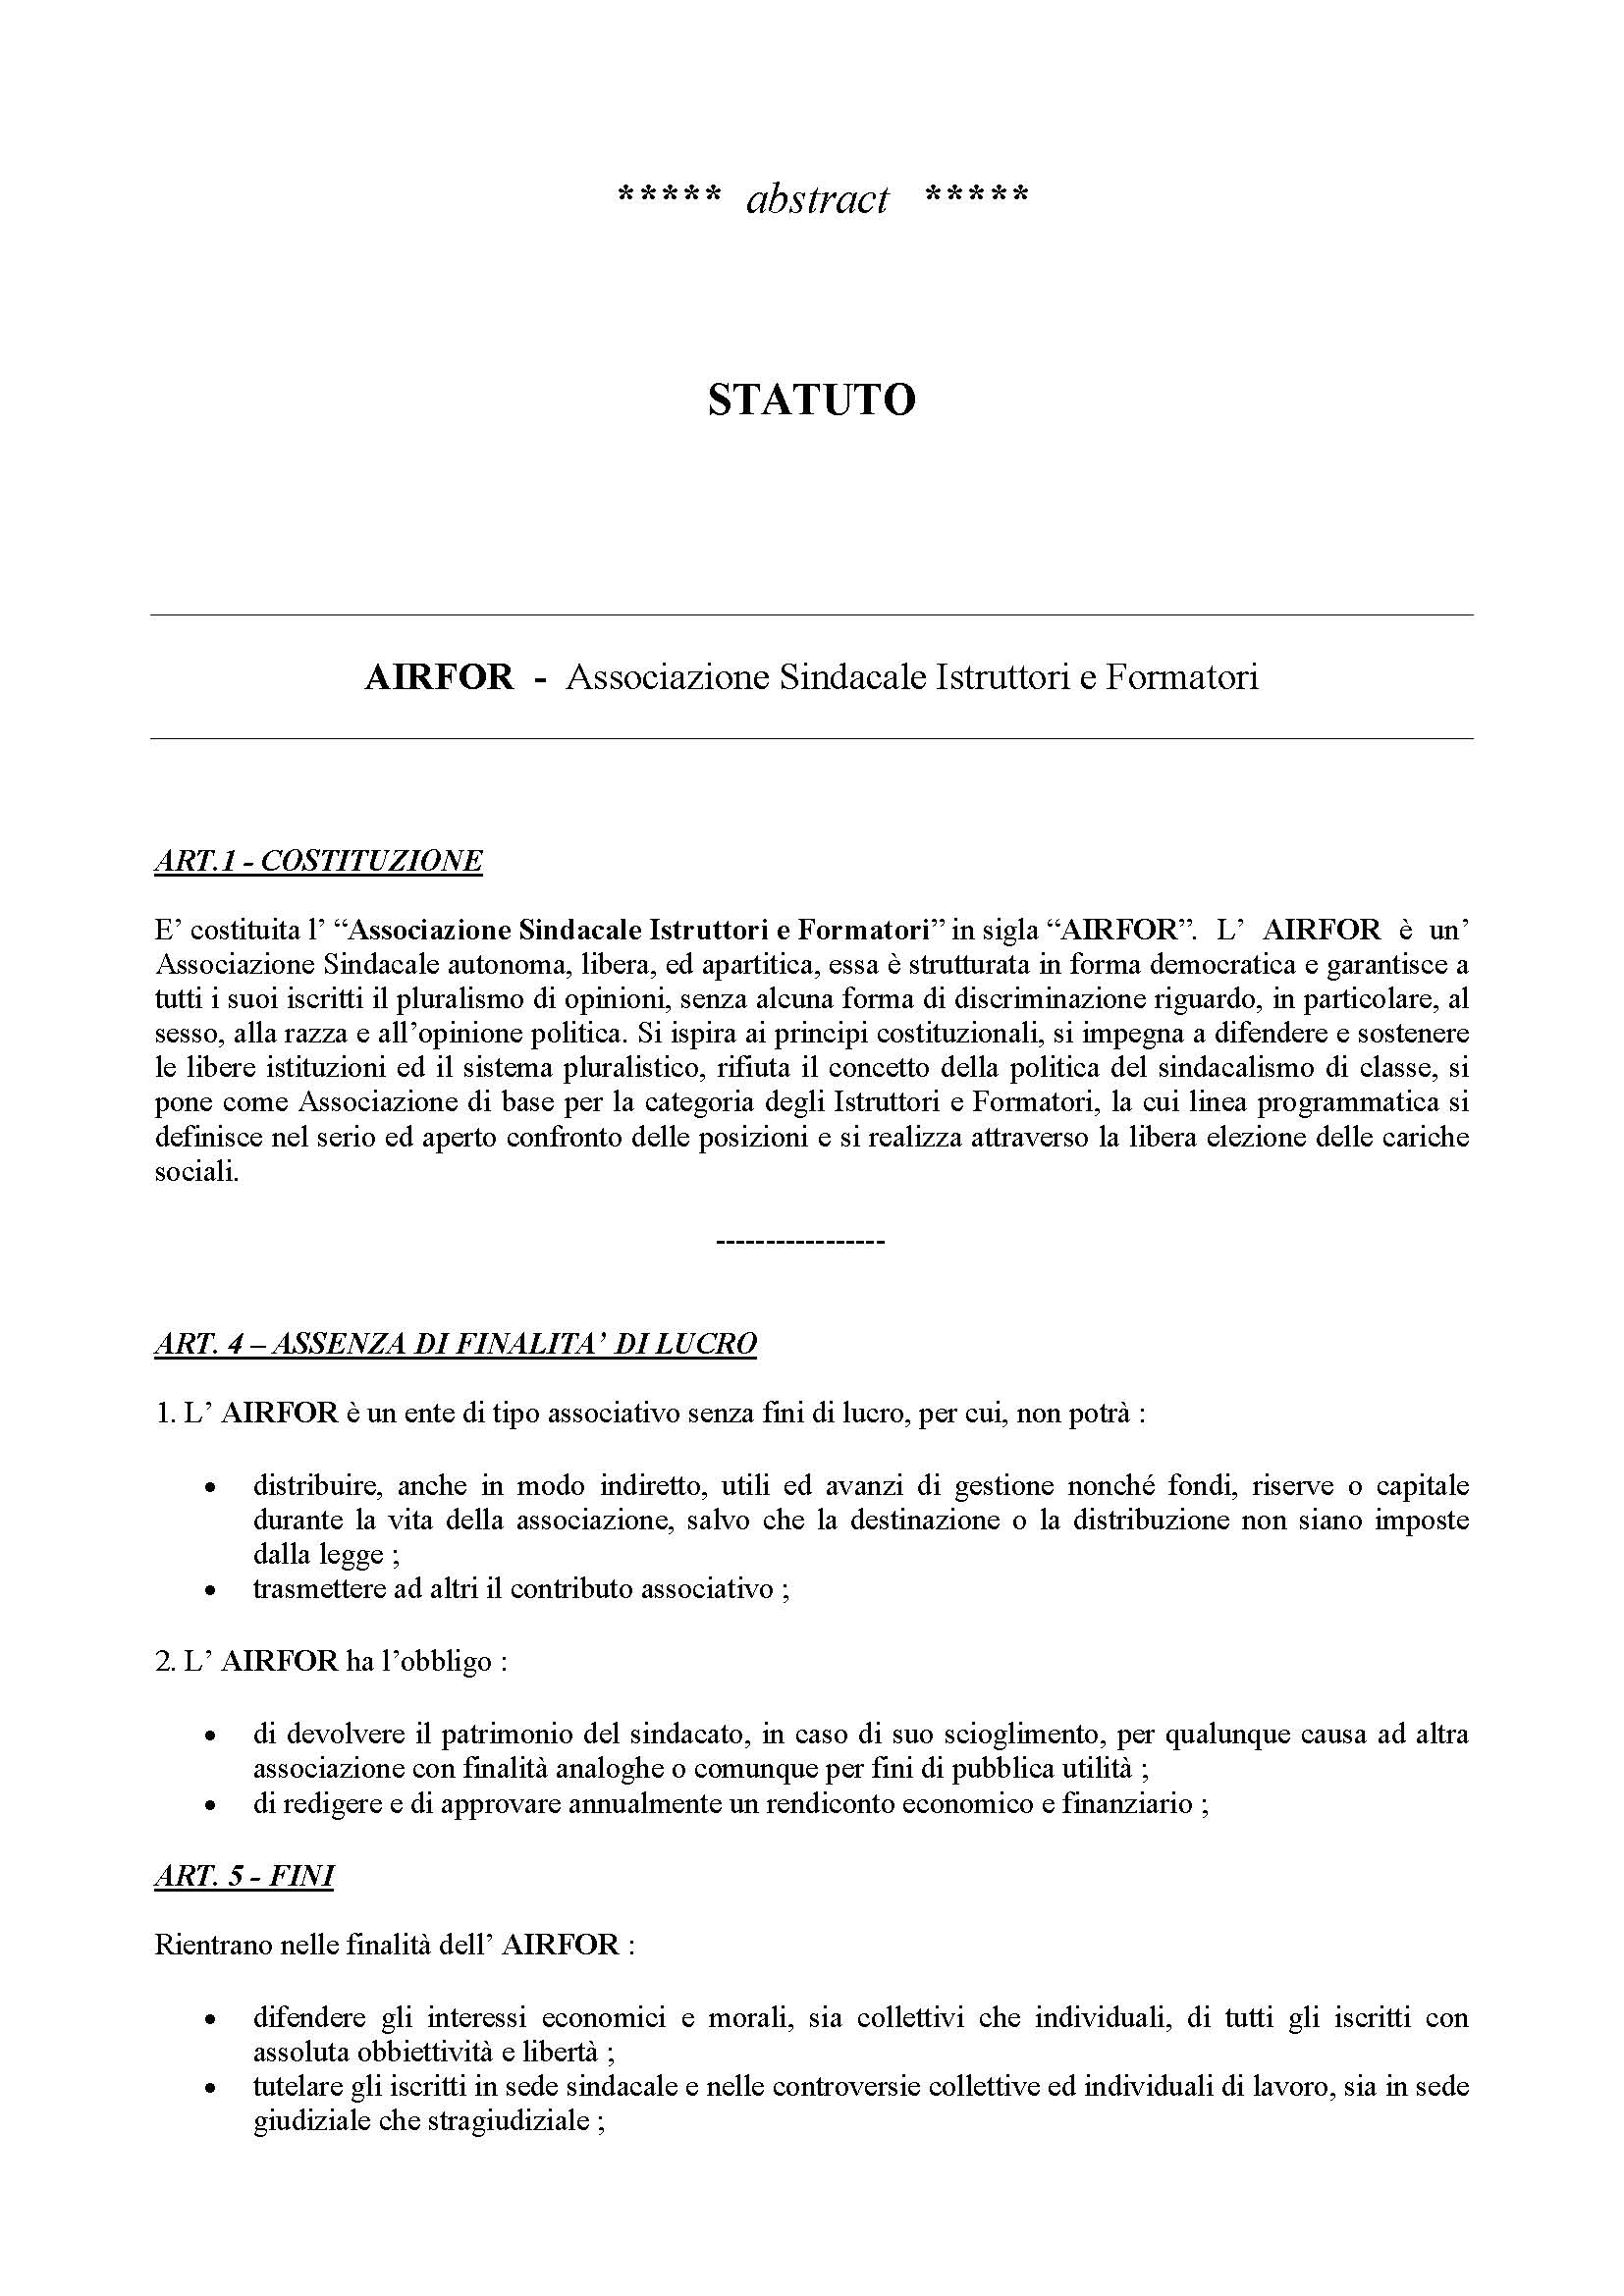 Abstract_Statuto_AIRFOR_Pagina_1